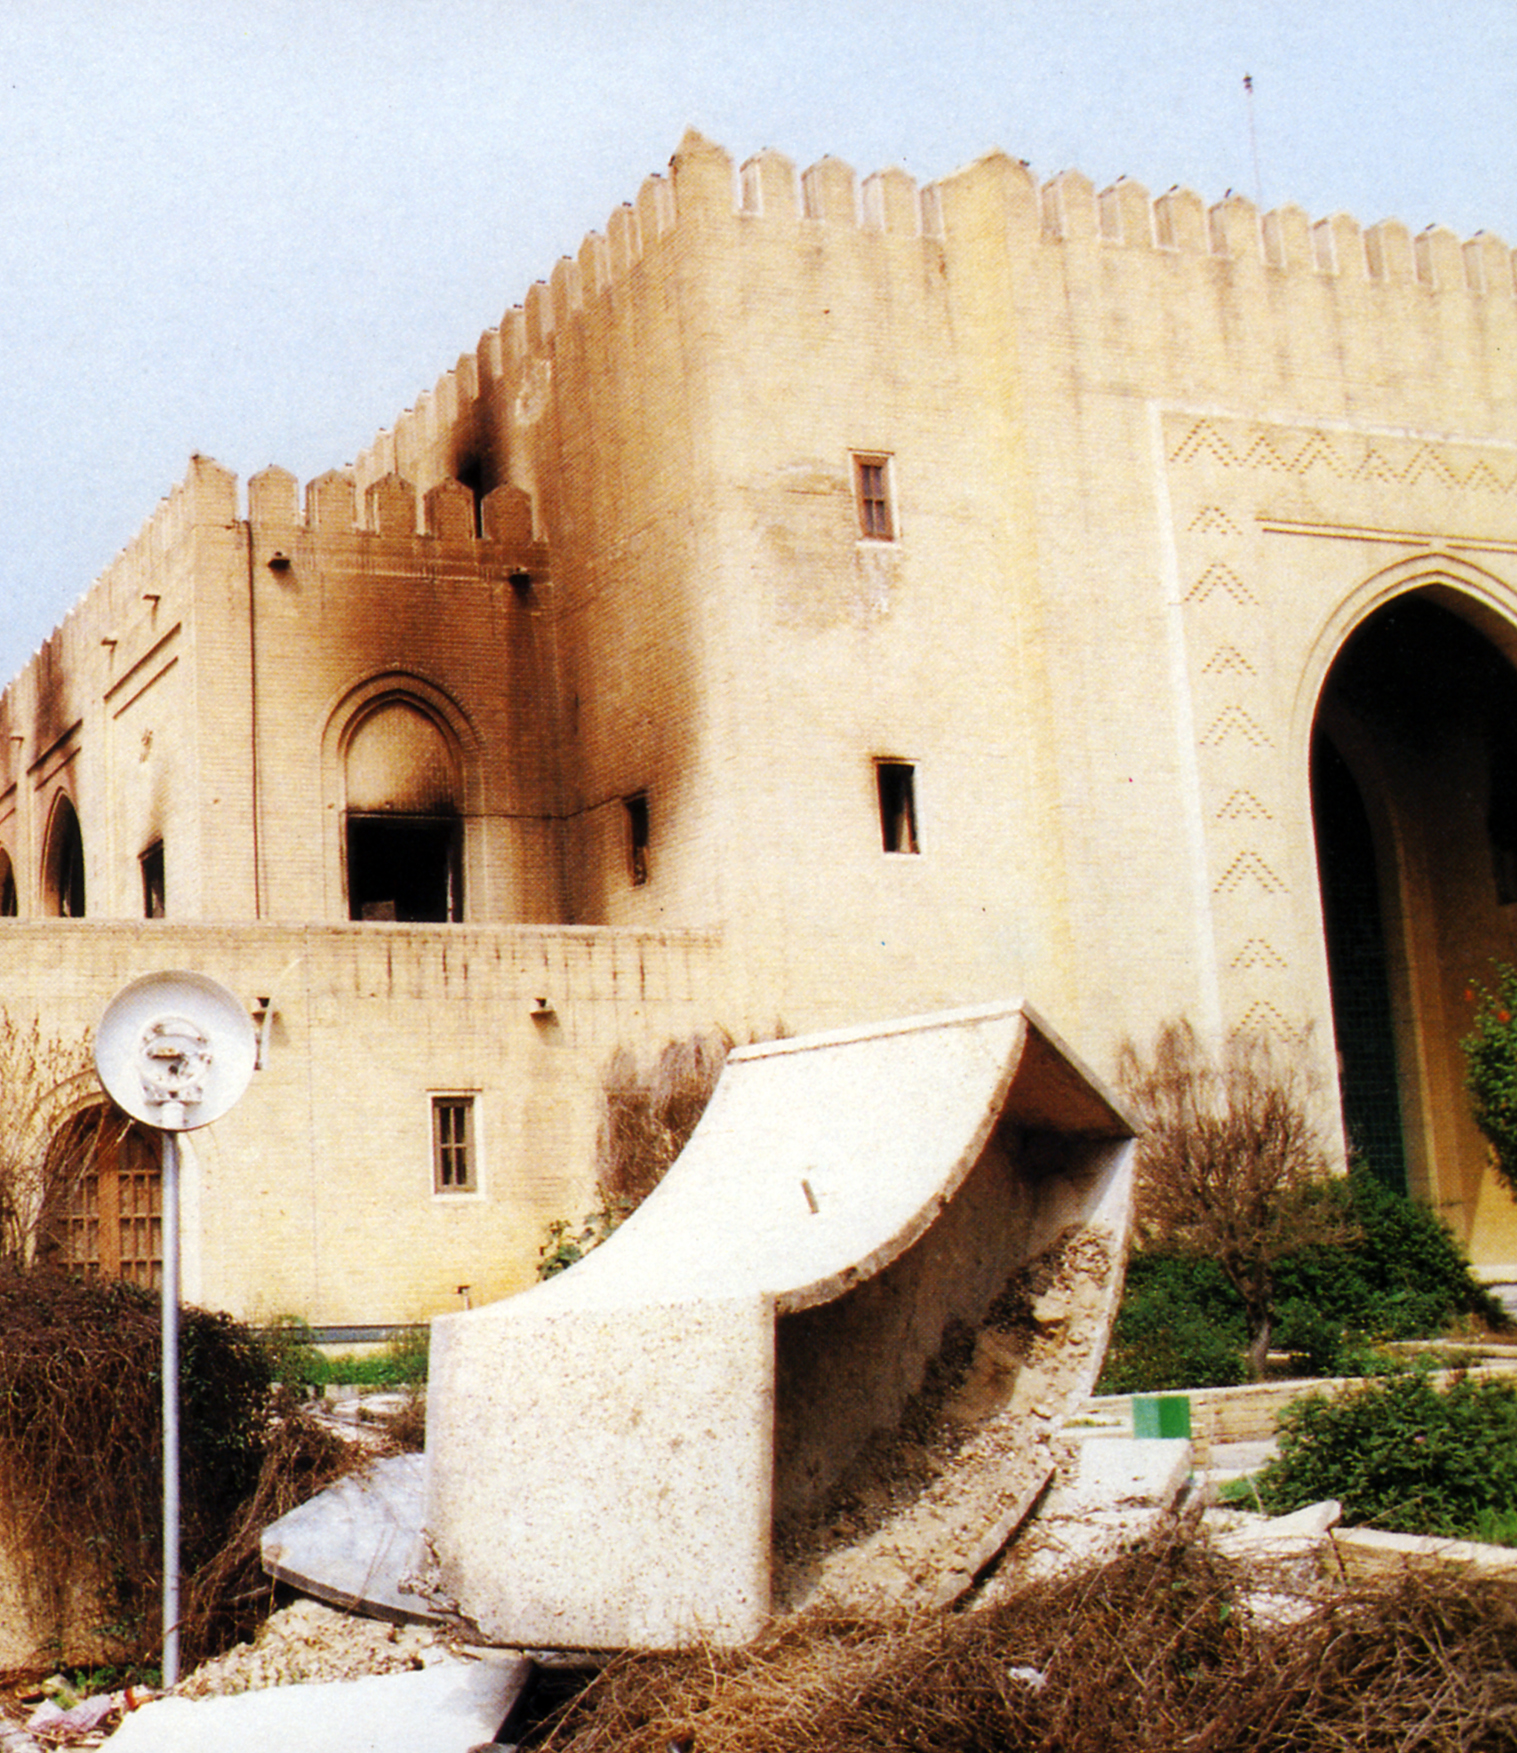 Al-Seif palace after being destroyed by Iraqi soldiers during the invasion